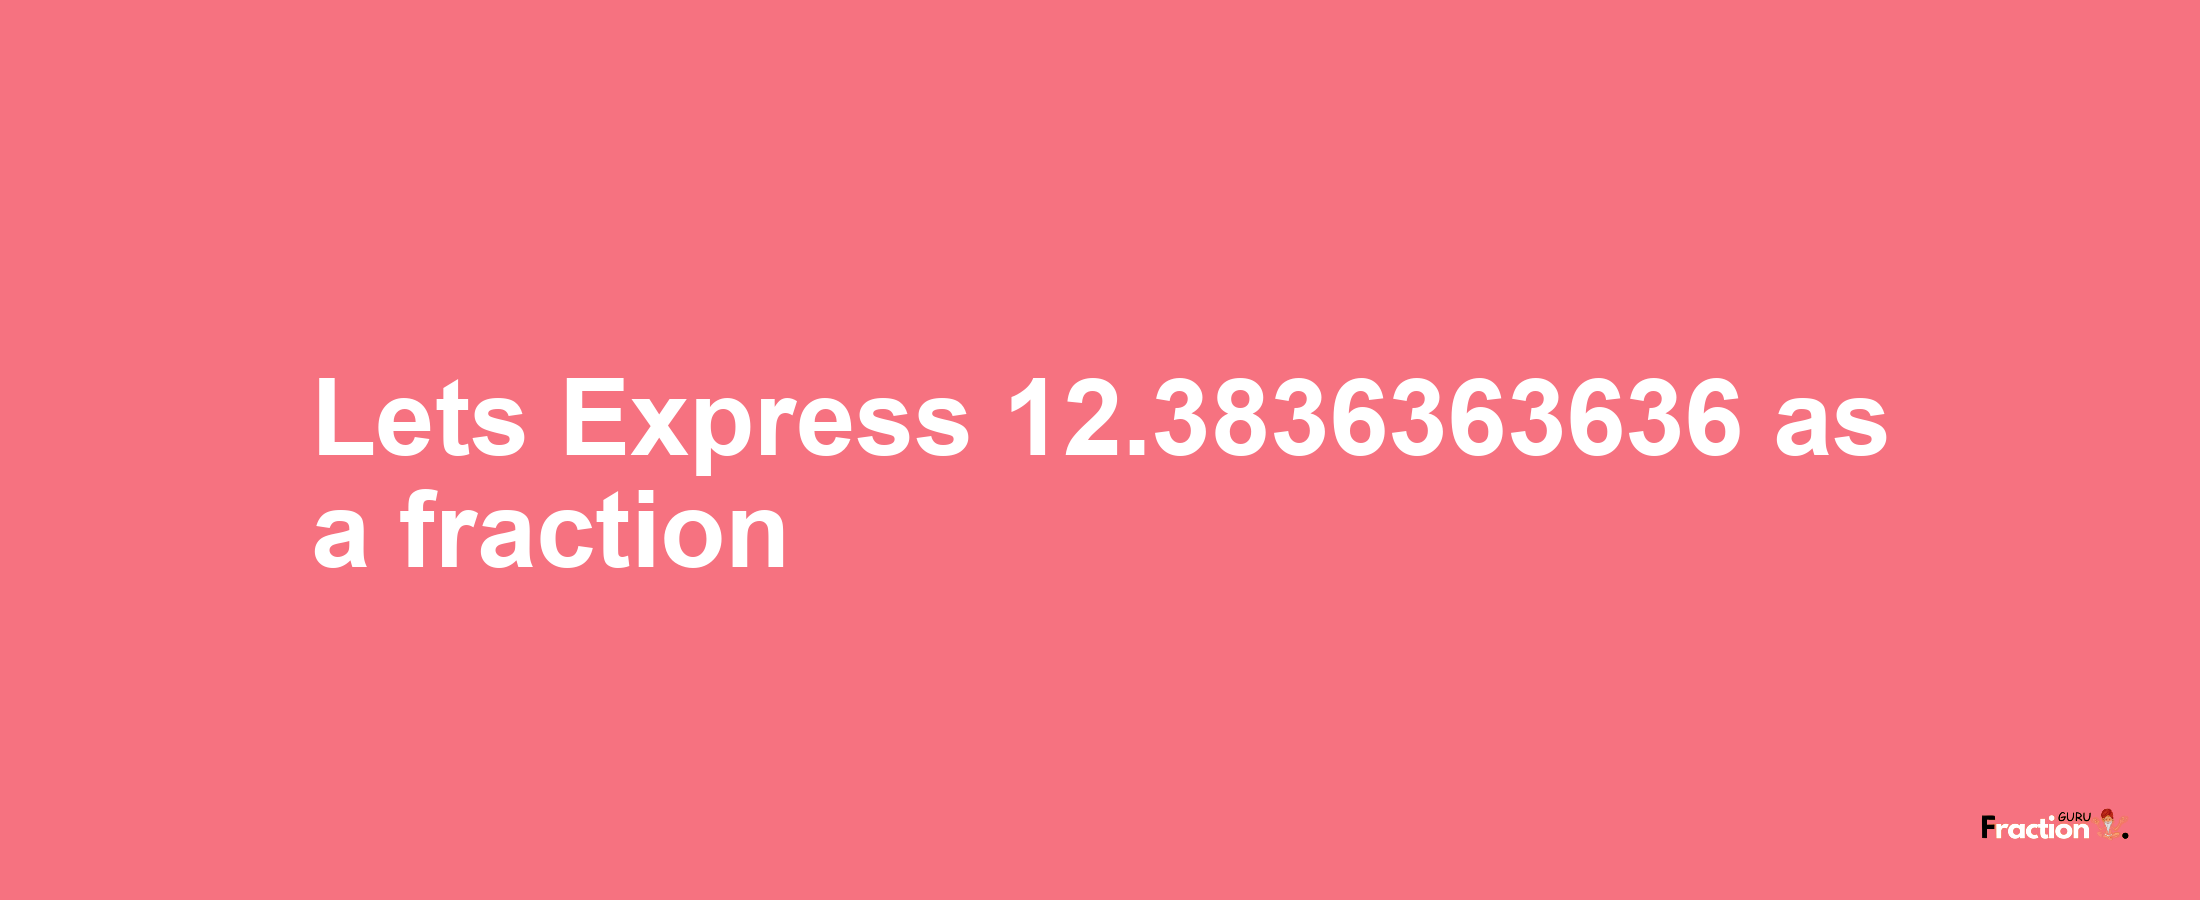 Lets Express 12.3836363636 as afraction